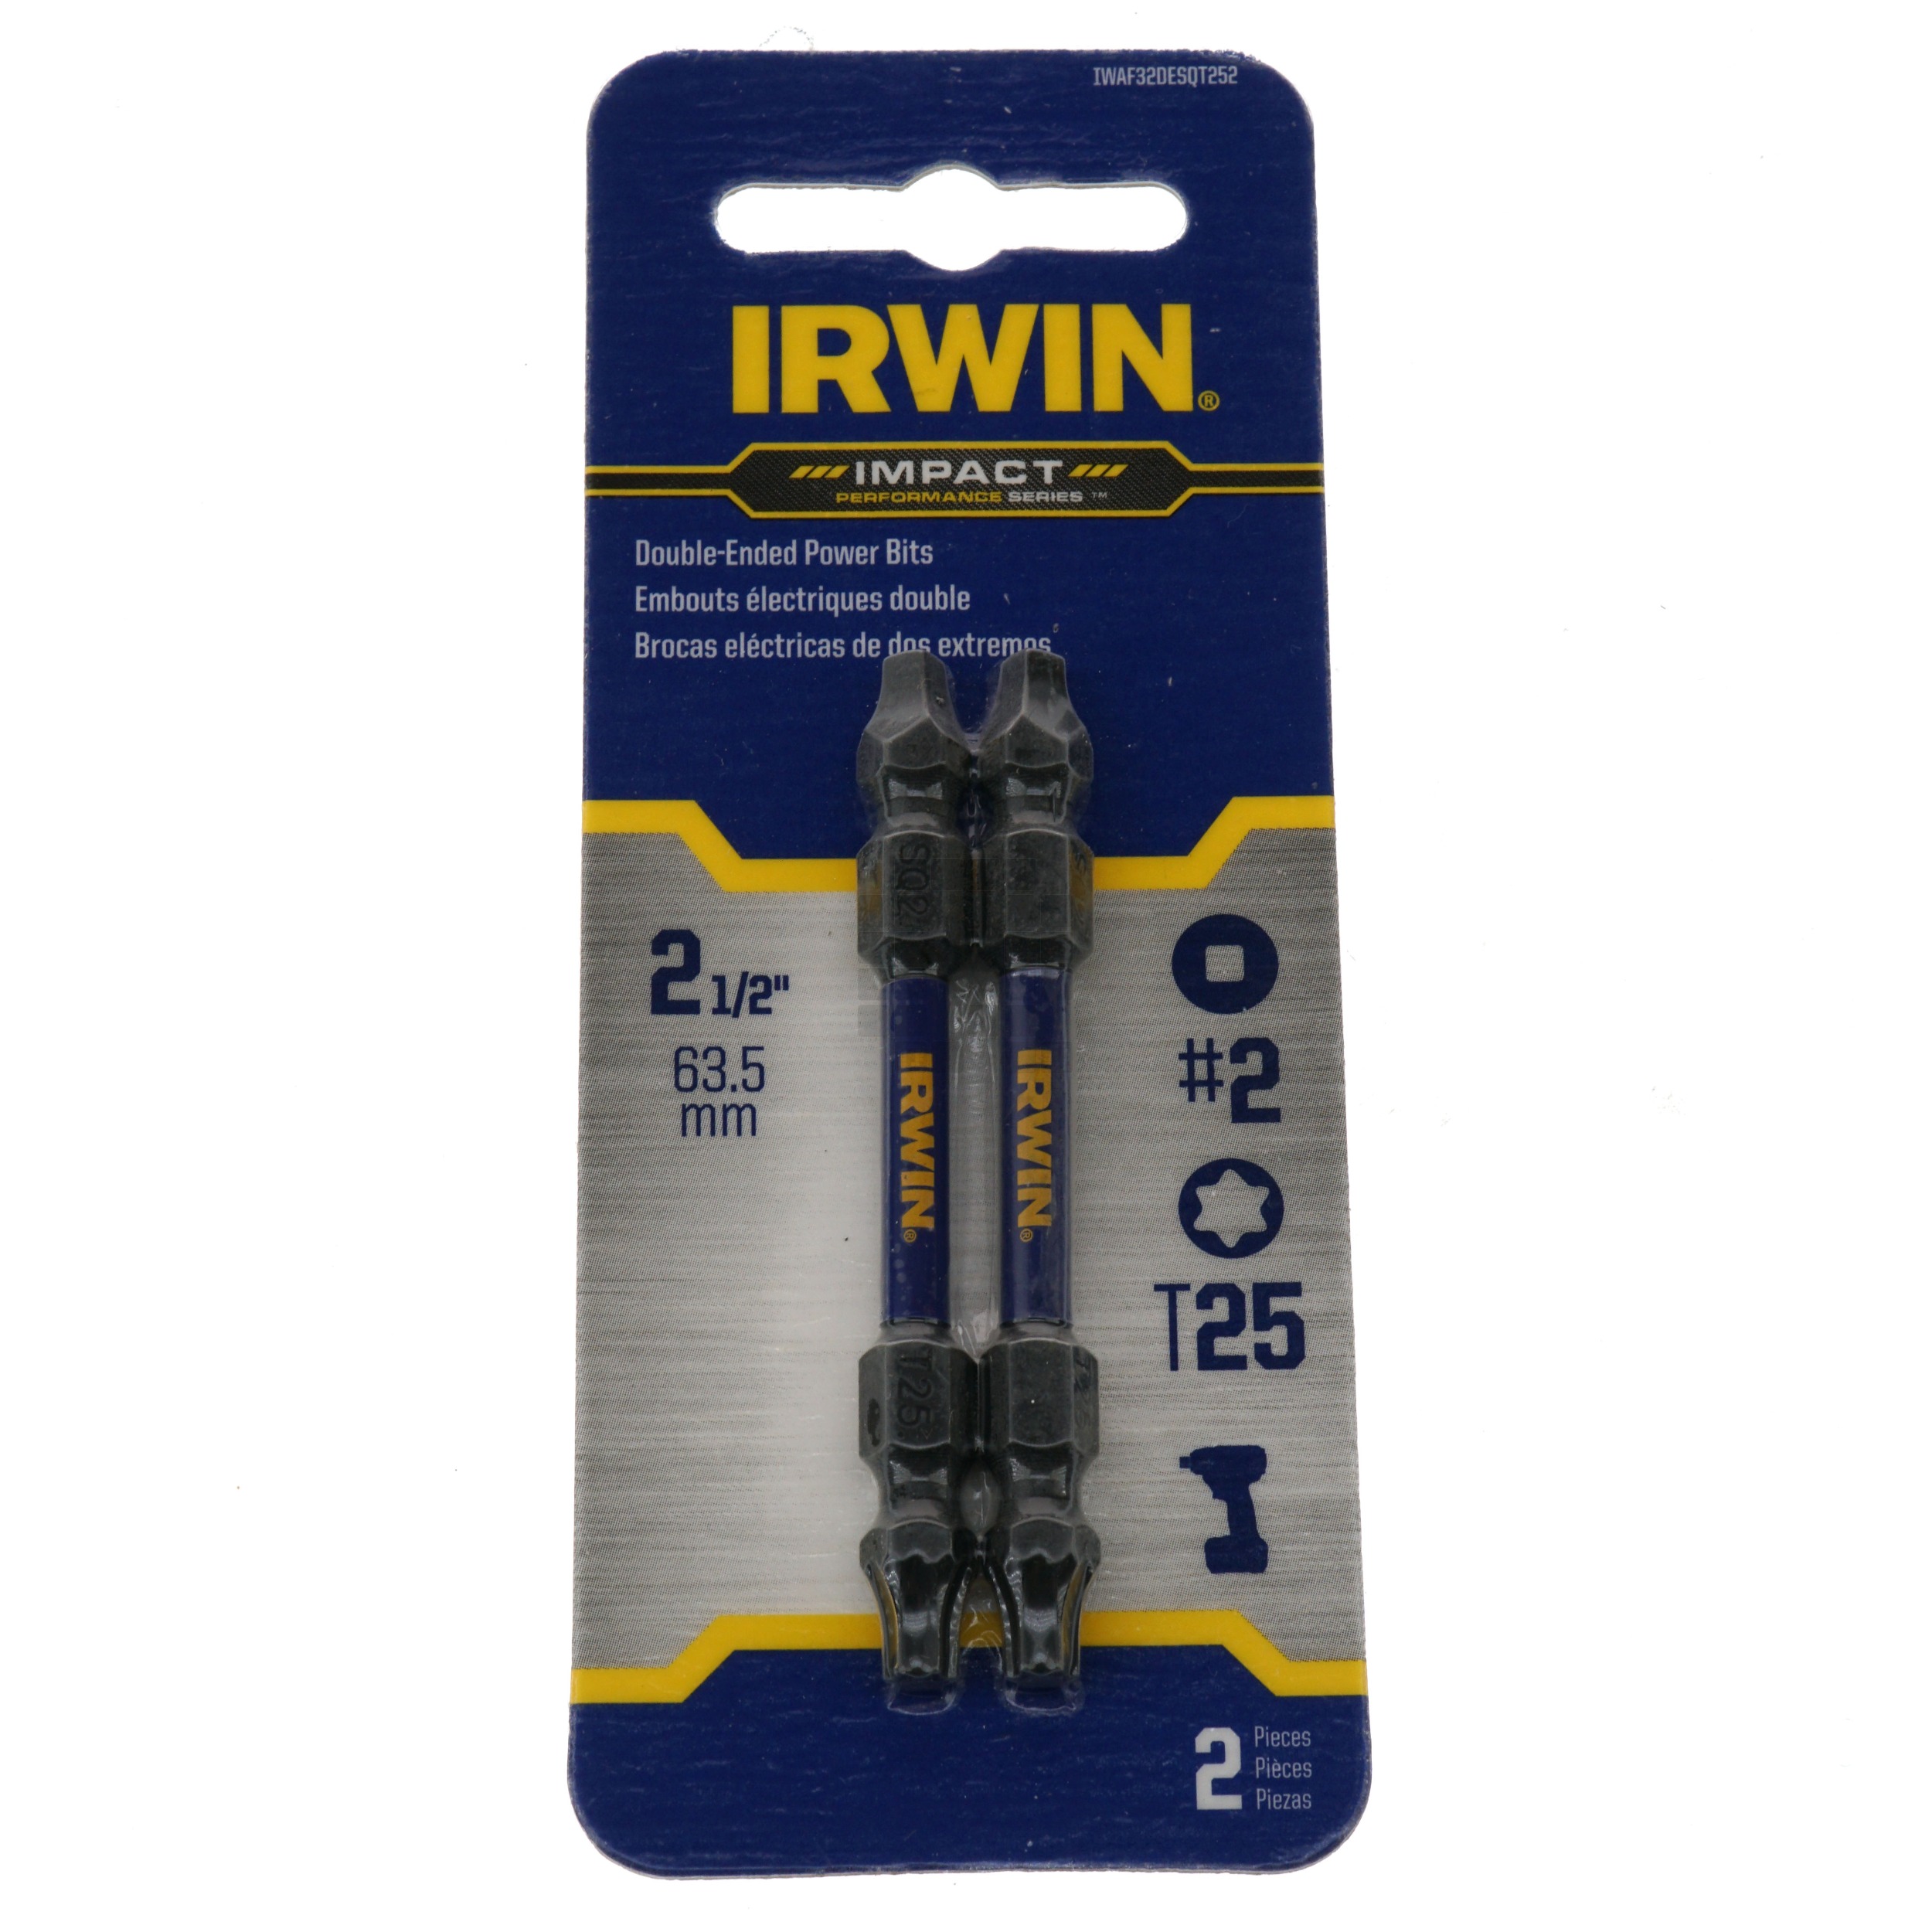 Irwin IWAF32DESQT252 Double-Ended Impact Power Bits, #2 Square and T25 Torx, 2.5" Length